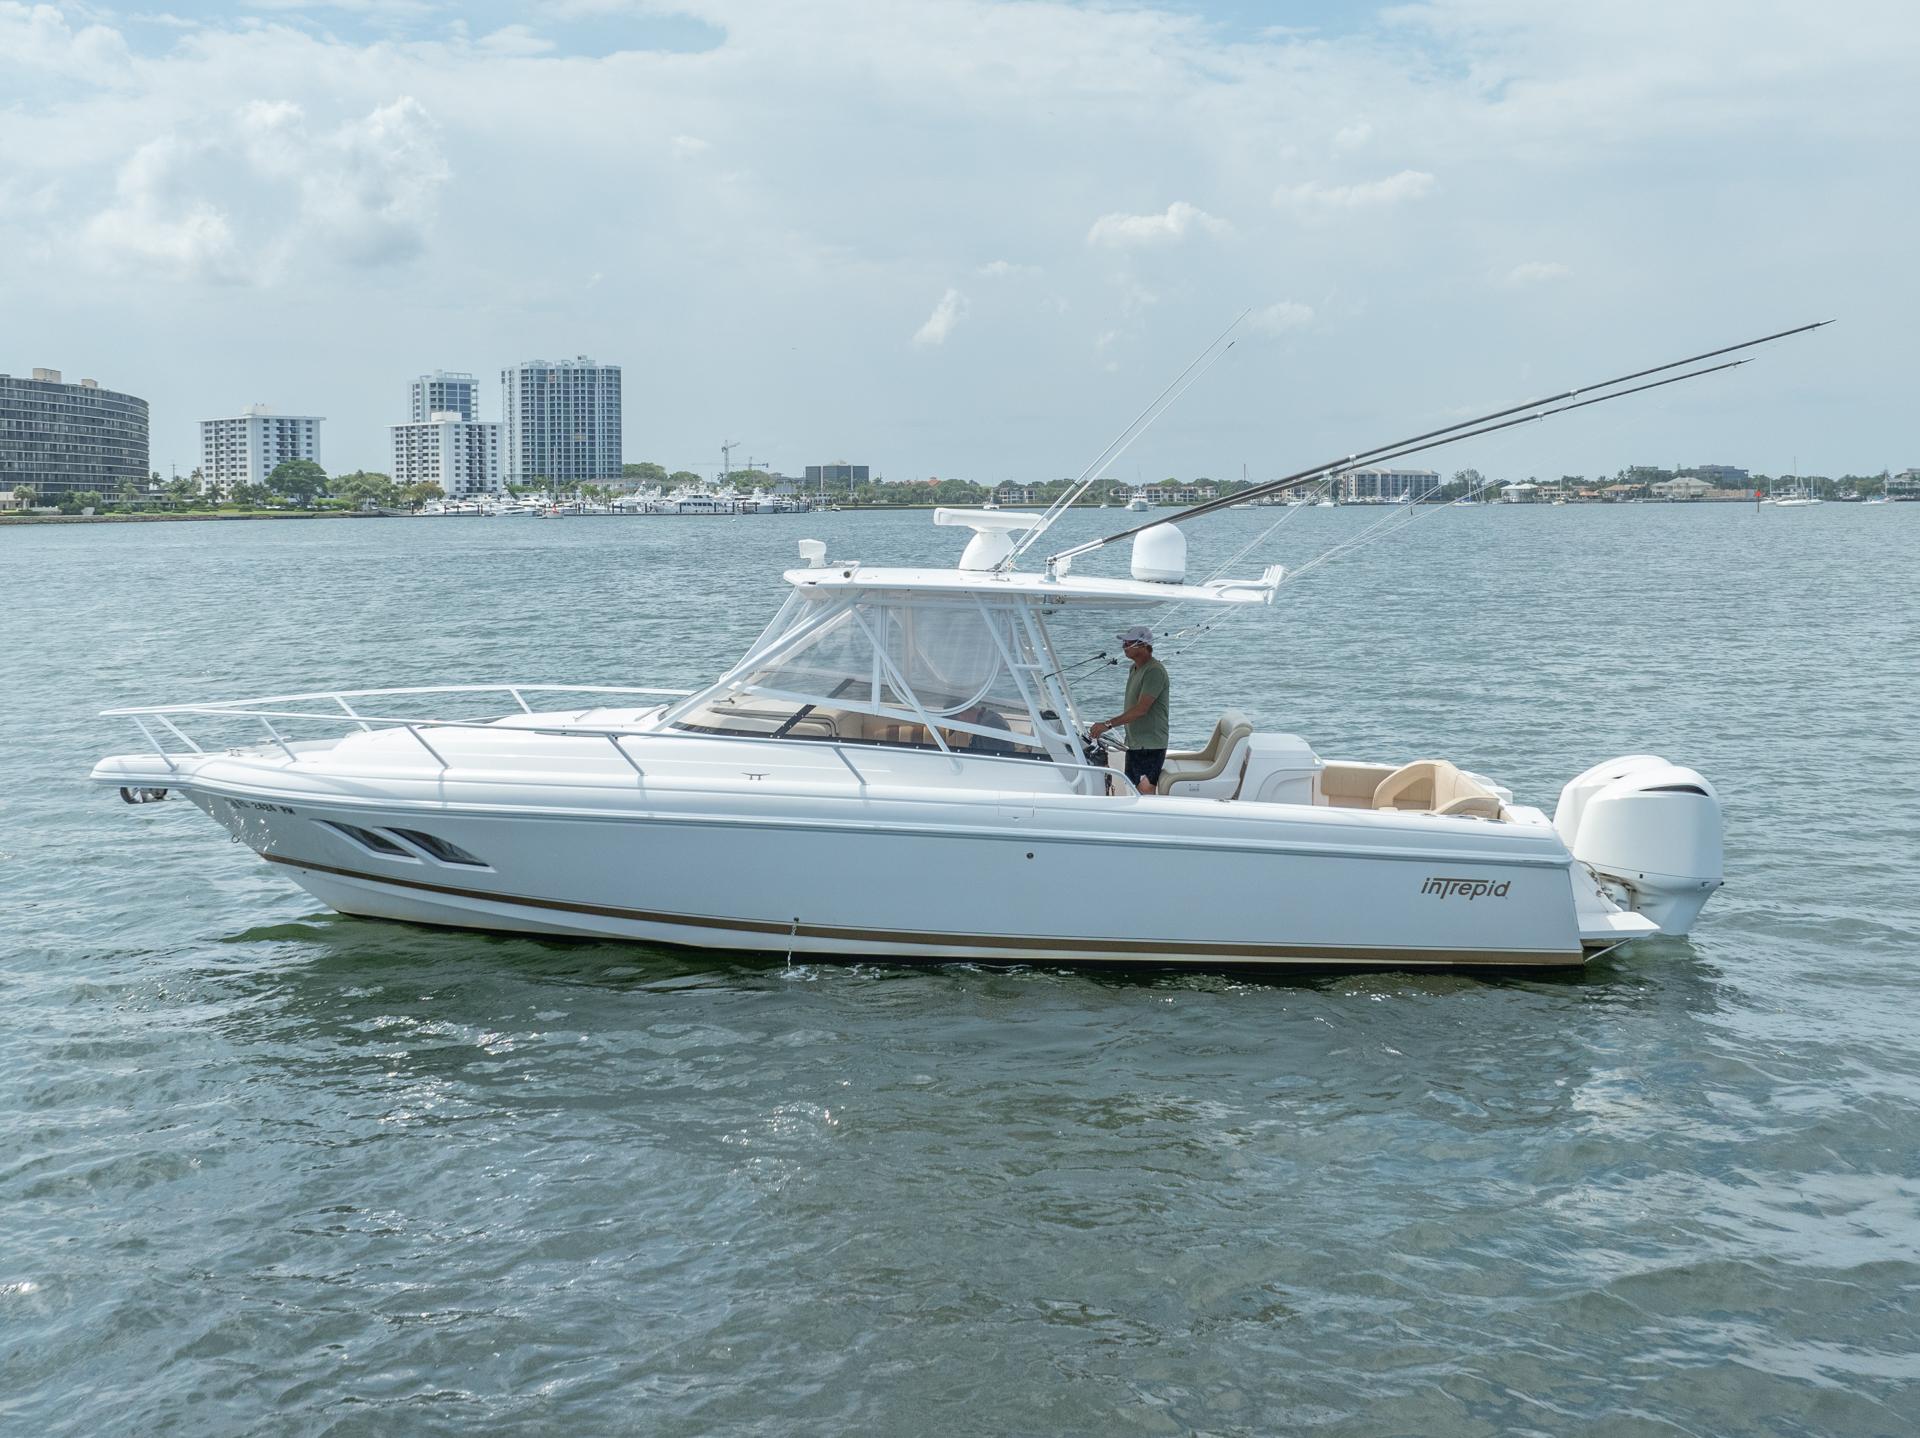 2012 Intrepid - Exterior profile on the water